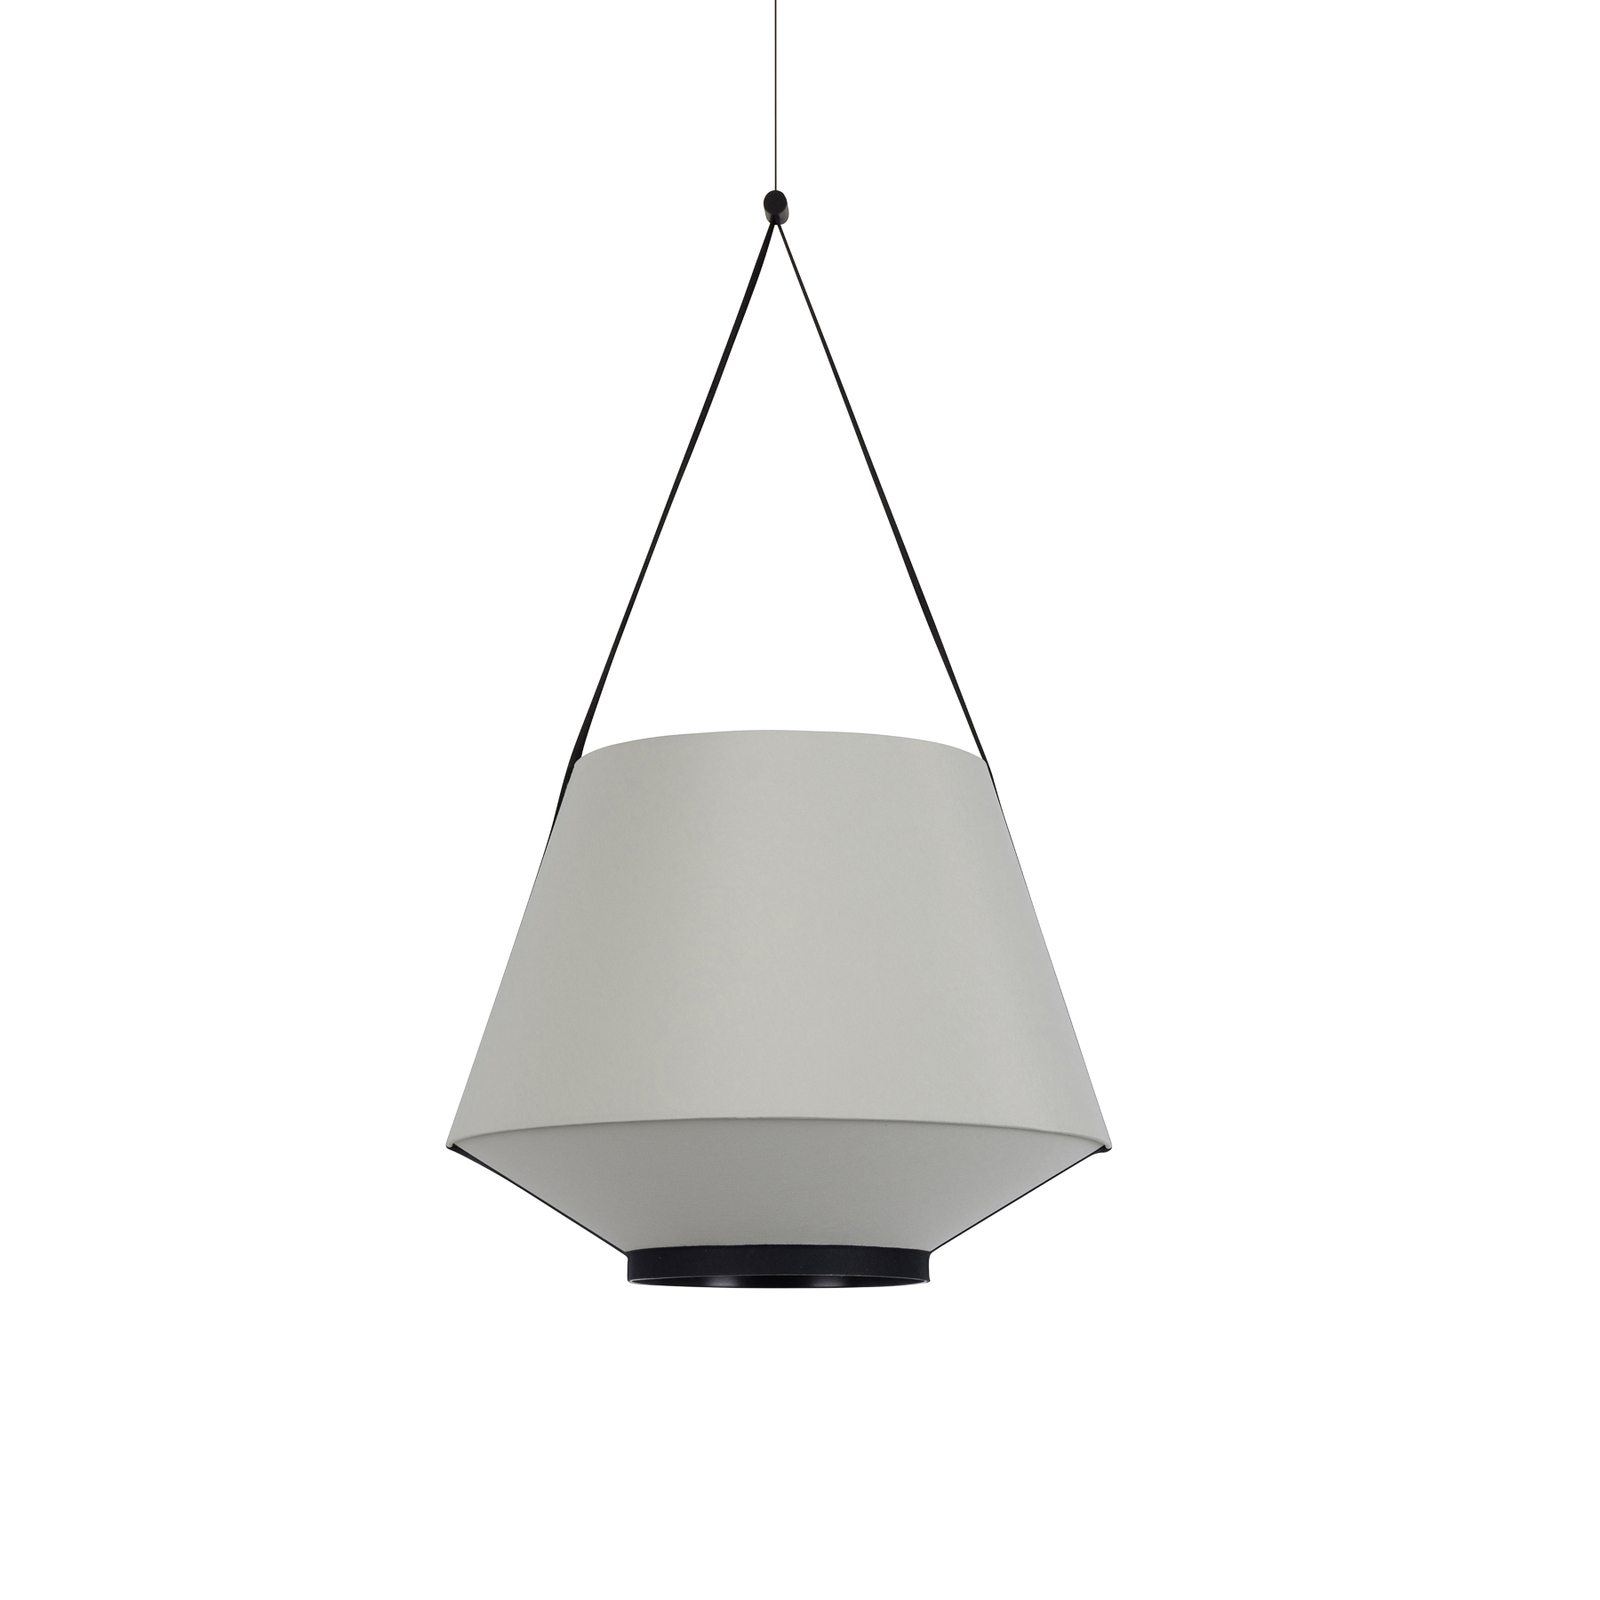 Forestier Carrie S pendant light, olive green